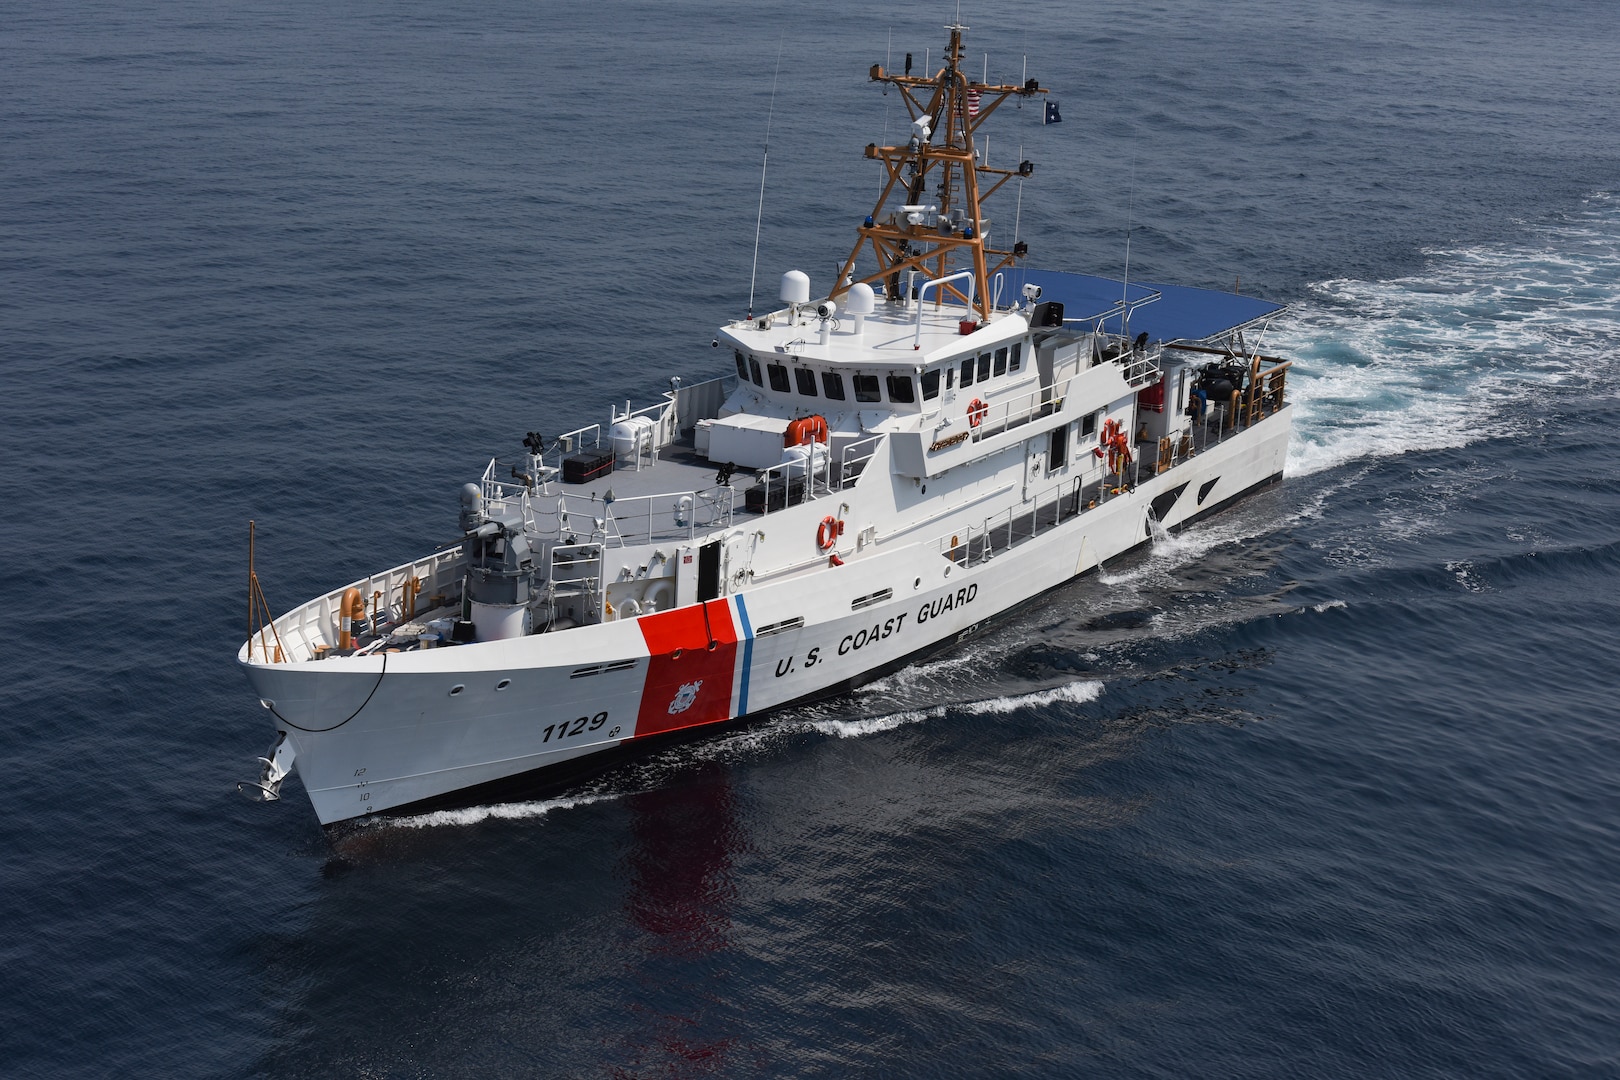 The Coast Guard Cutter Forrest Rednour arrives in San Pedro, California, Aug. 11, 2018. The Forrest Rednour is slated to be the first of four Fast-Response Cutters to be home-ported at Base Los Angeles-Long Beach and is scheduled to be officially commissioned in the fall.